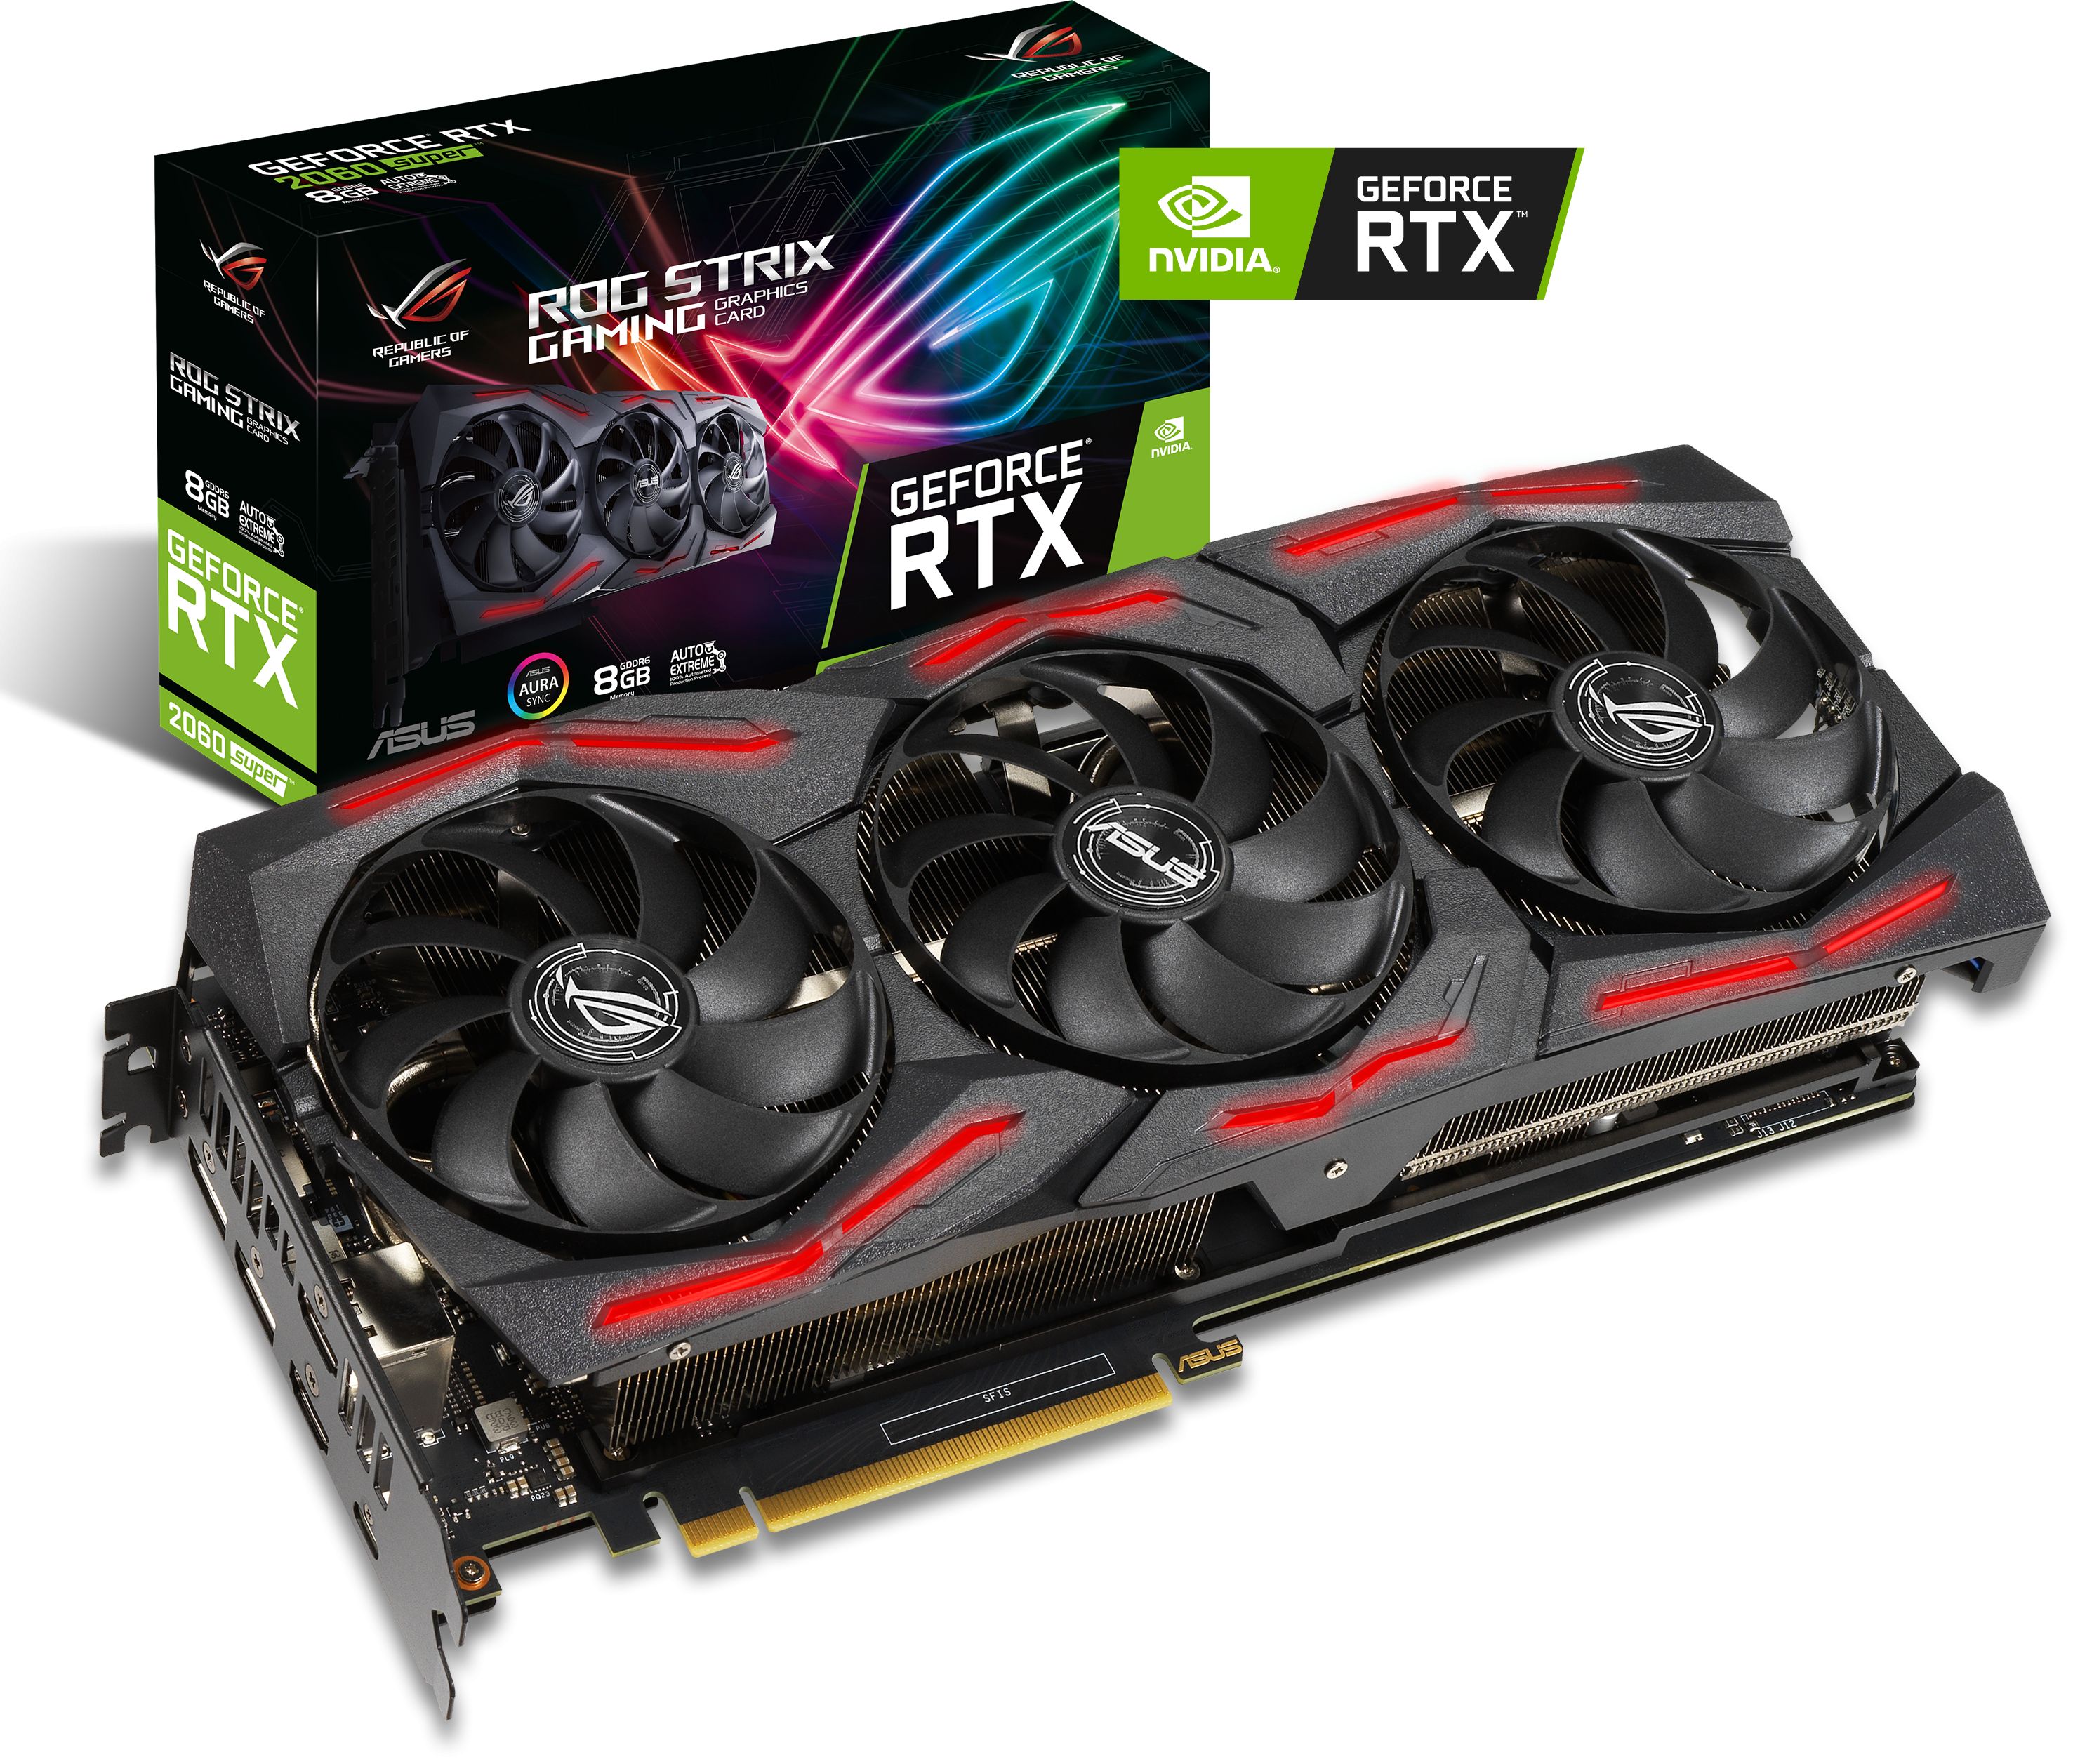 asus with nvidia geforce rtx 2060 16gb ram